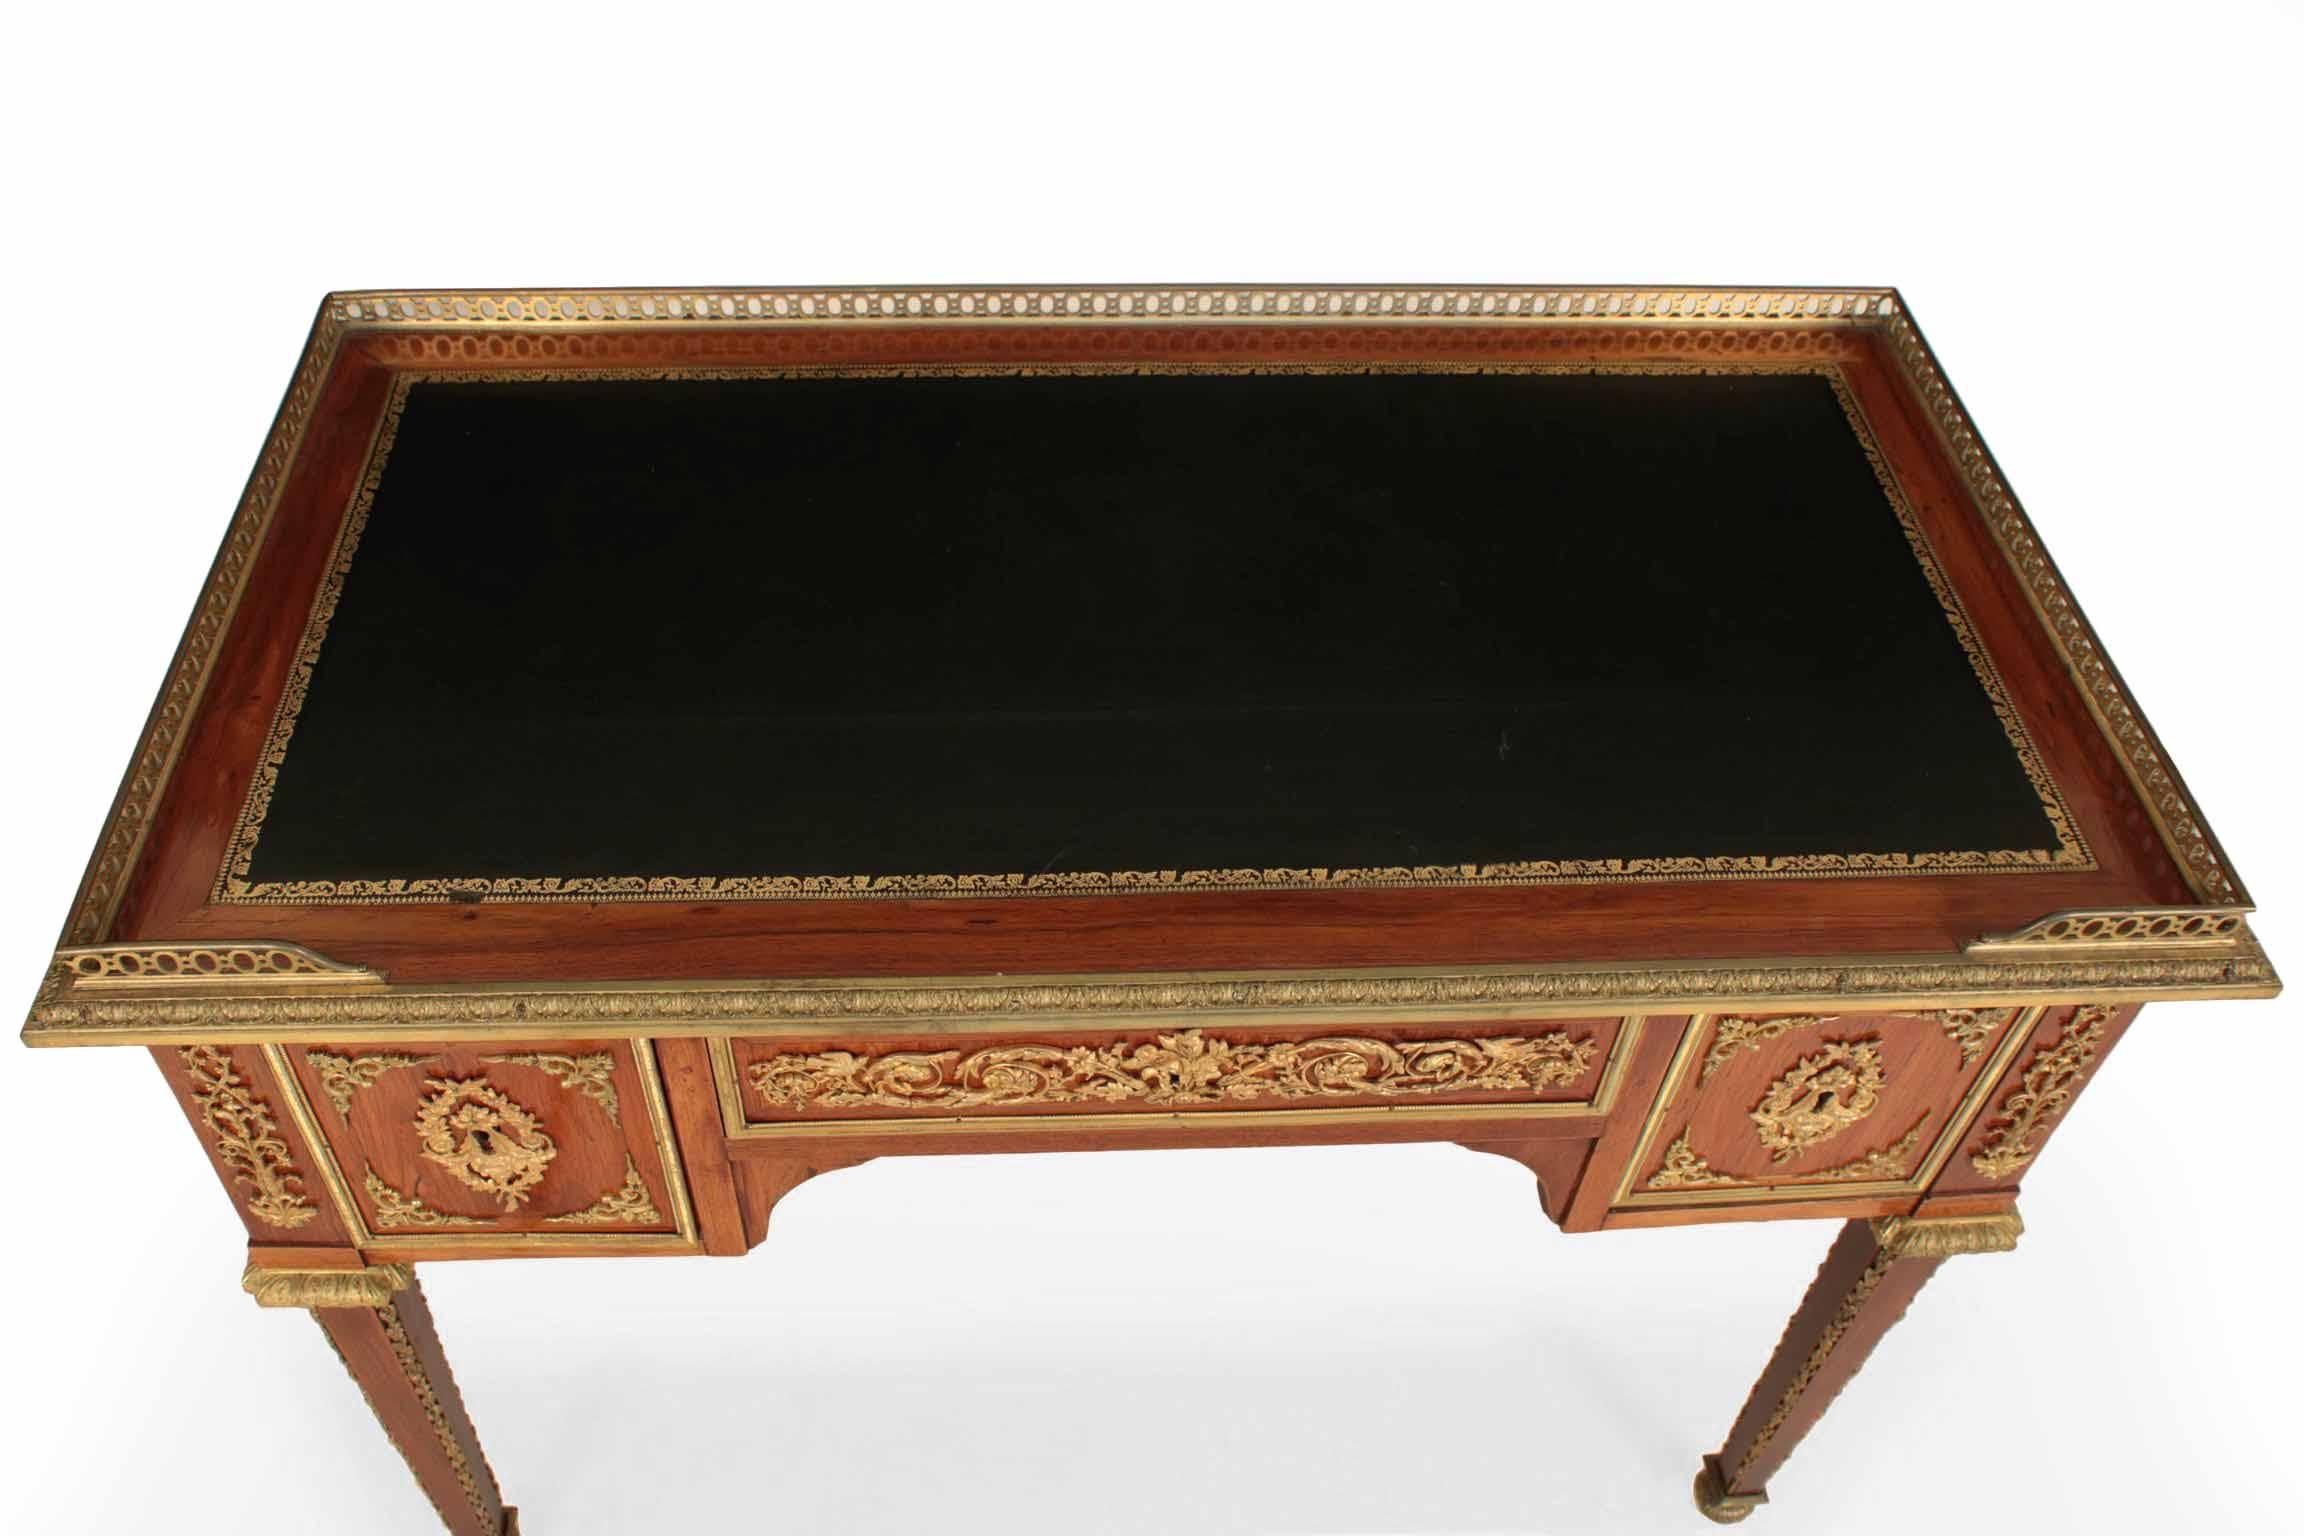 European Fine French Neoclassical Rosewood and Bronze Leather Writing Desk, 19th Century